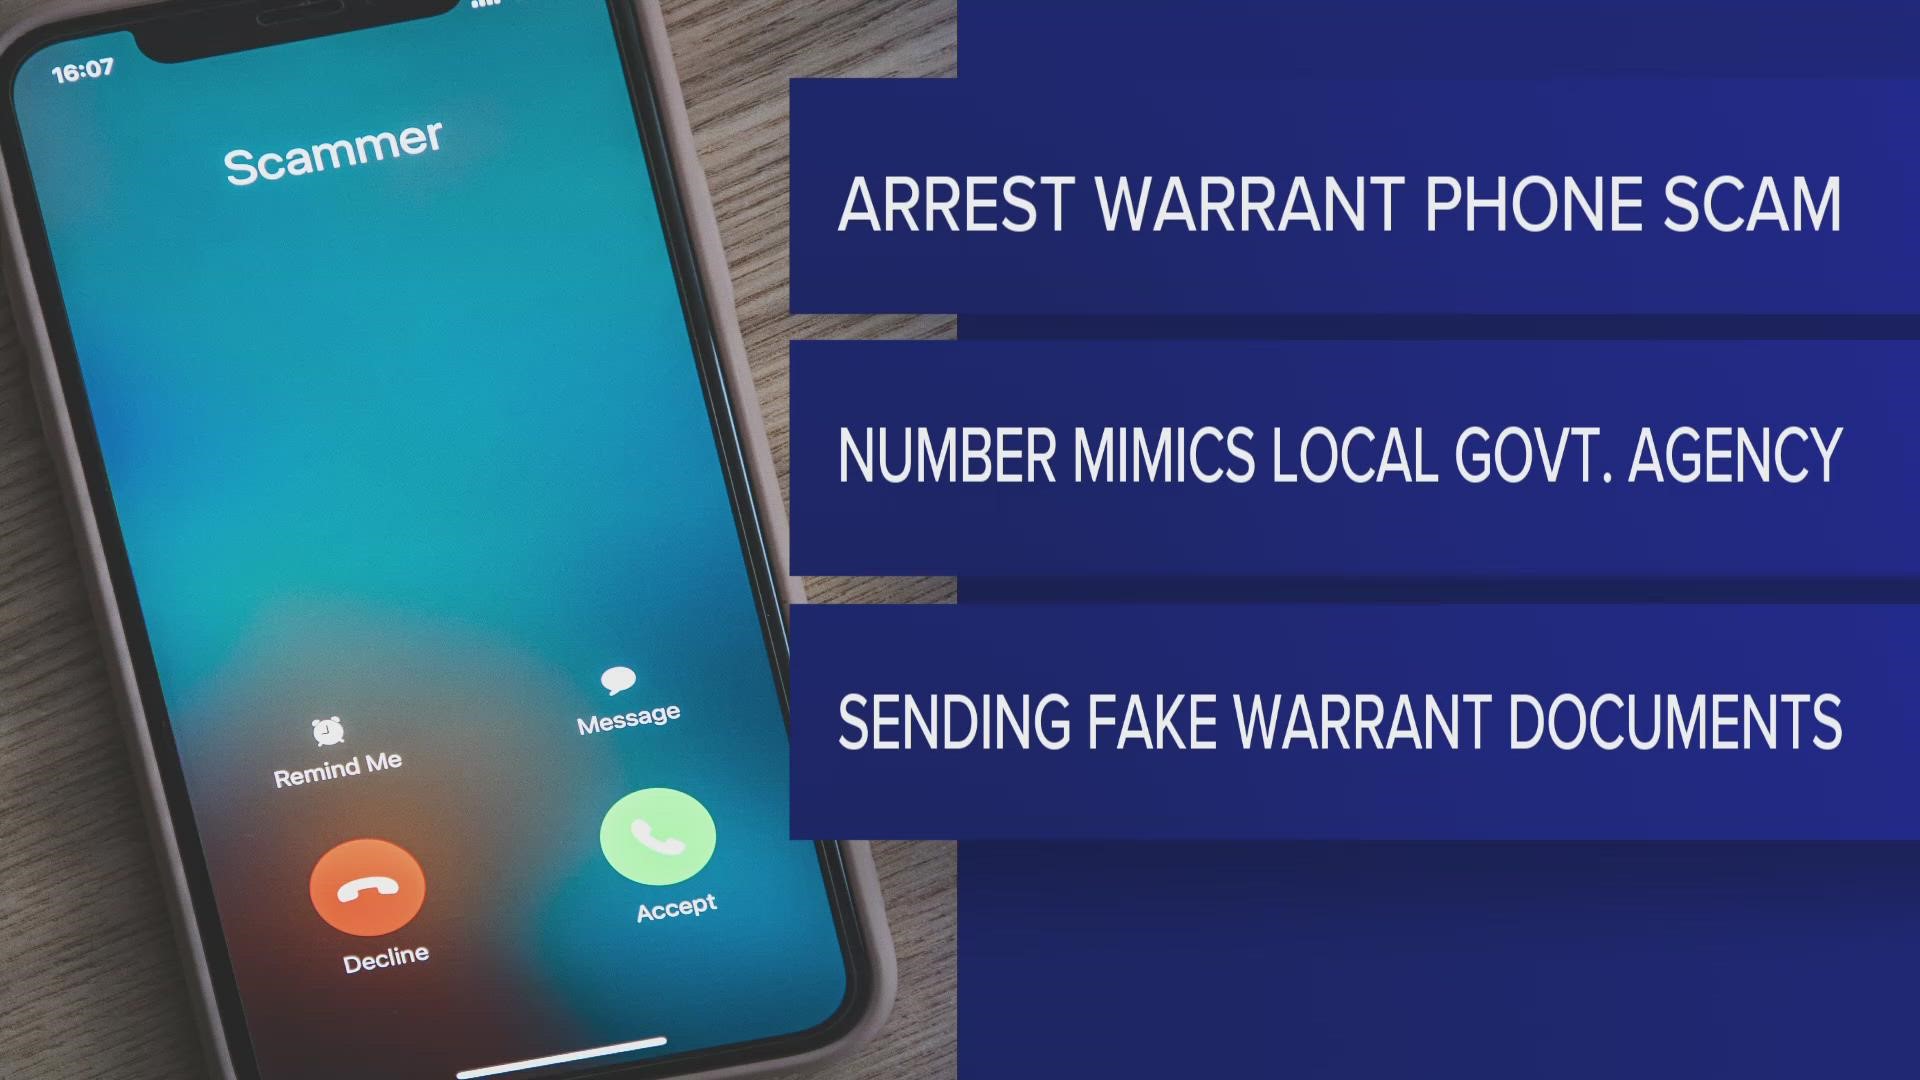 One resident even received a fabricated warrant in connection with the call.